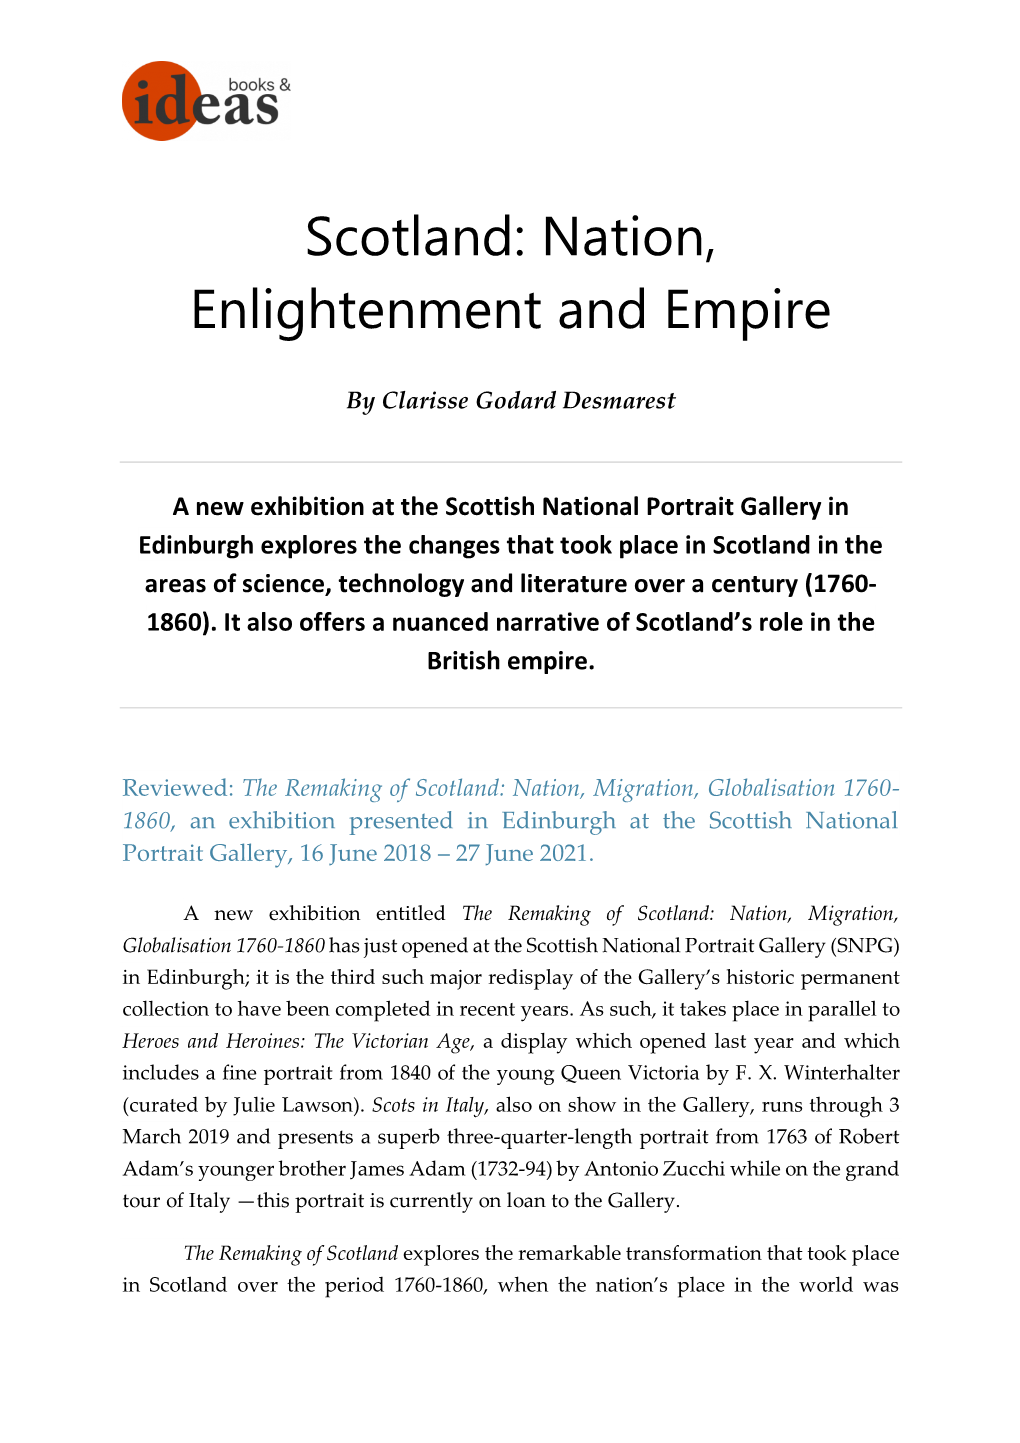 Scotland: Nation, Enlightenment and Empire